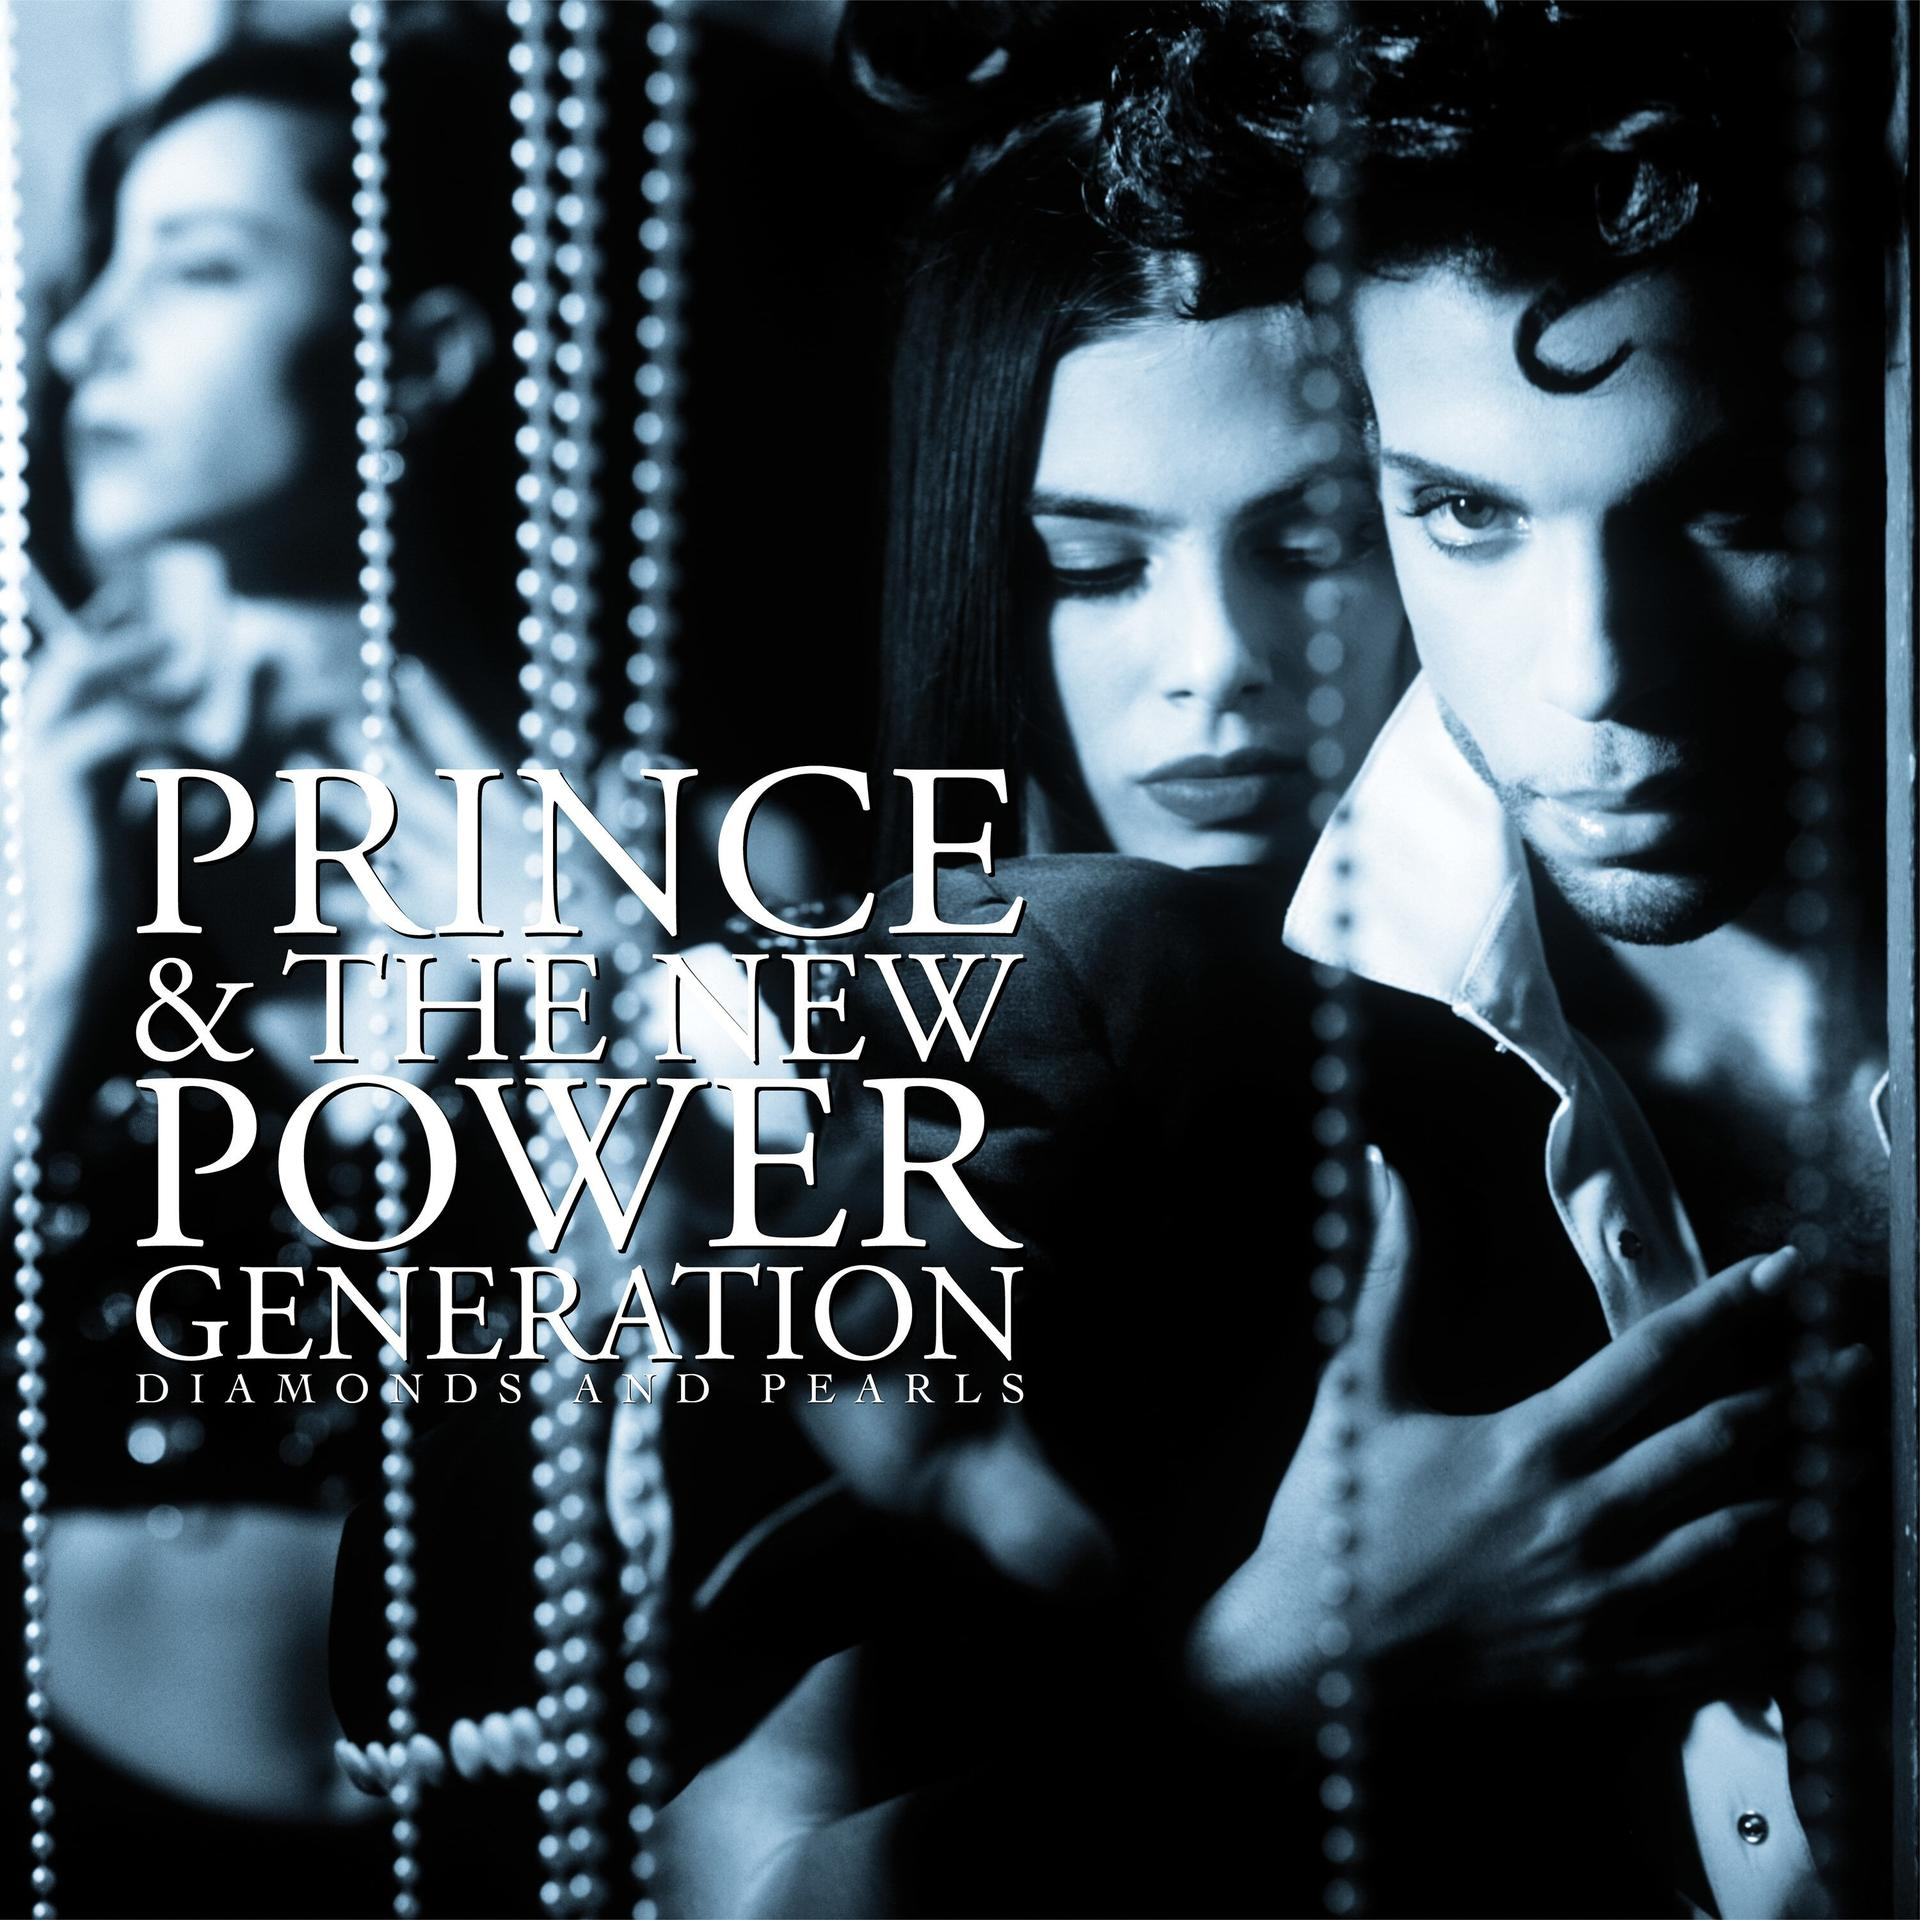 And Generation - Diamonds The & Power (Vinyl) Prince - Pearls New